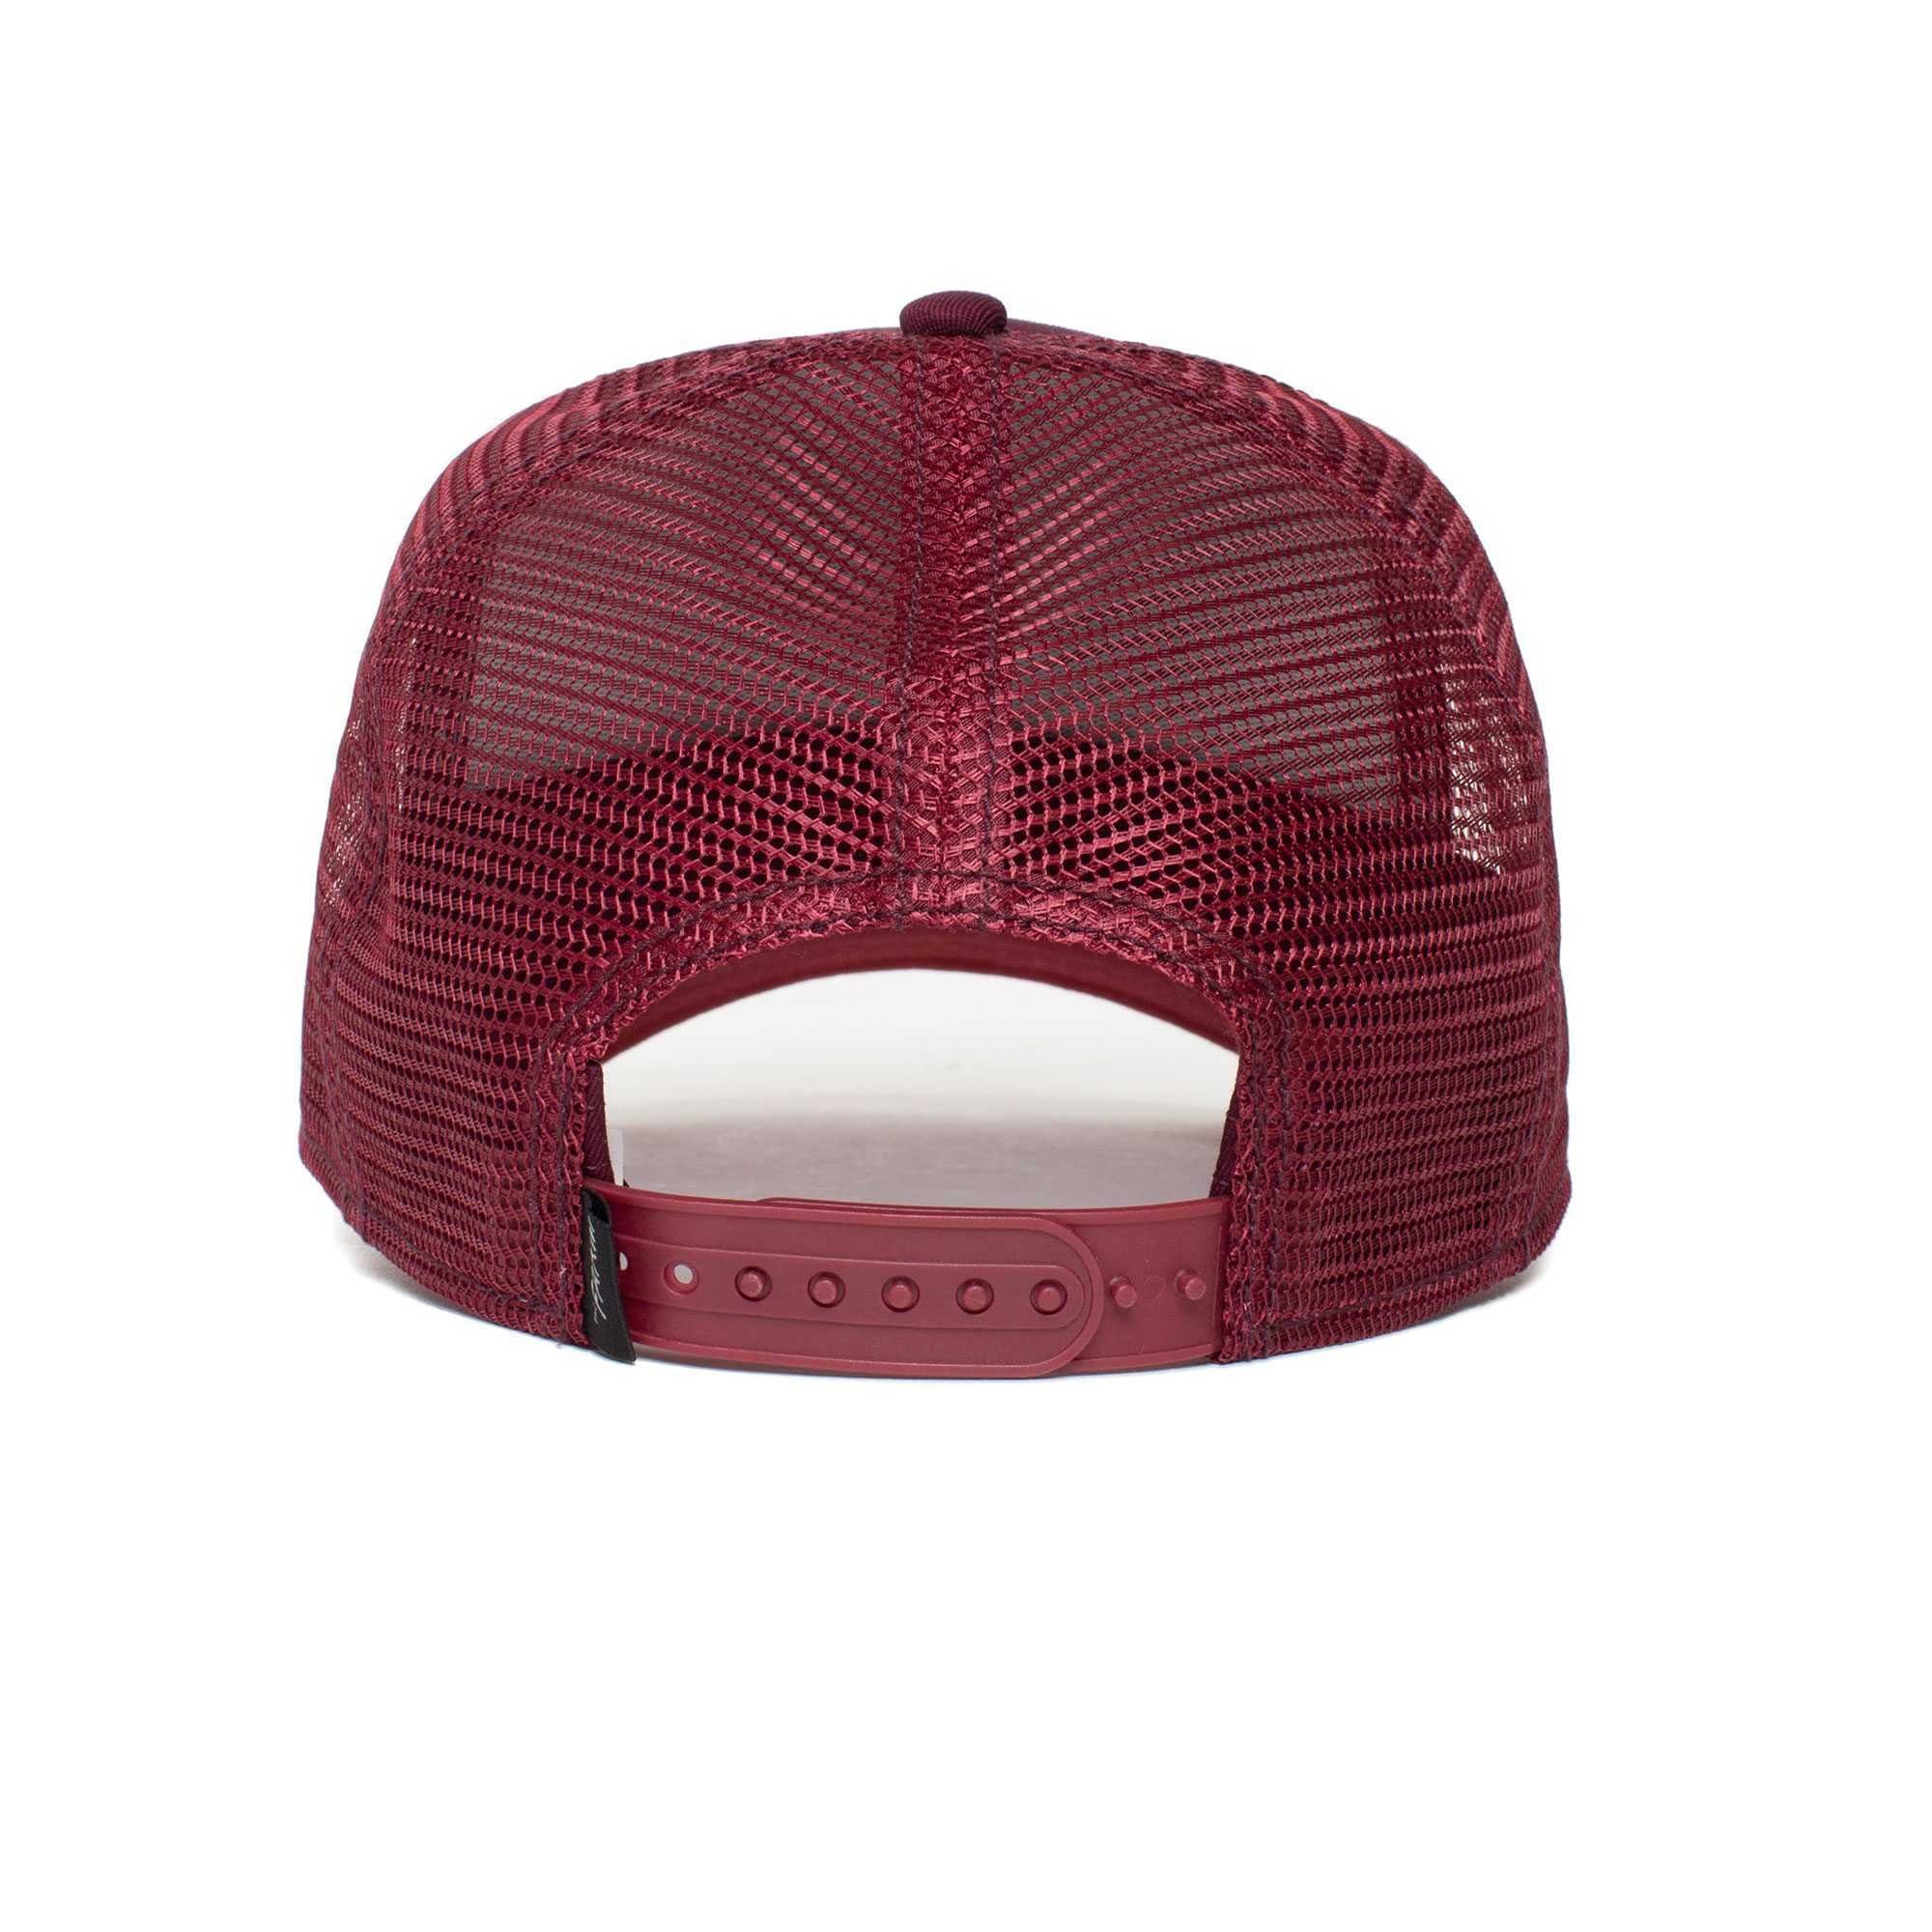 Size - Cap Unisex Kappe, Frontpatch, Trucker Baseball Bros. Panther maroon The One Cap GOORIN